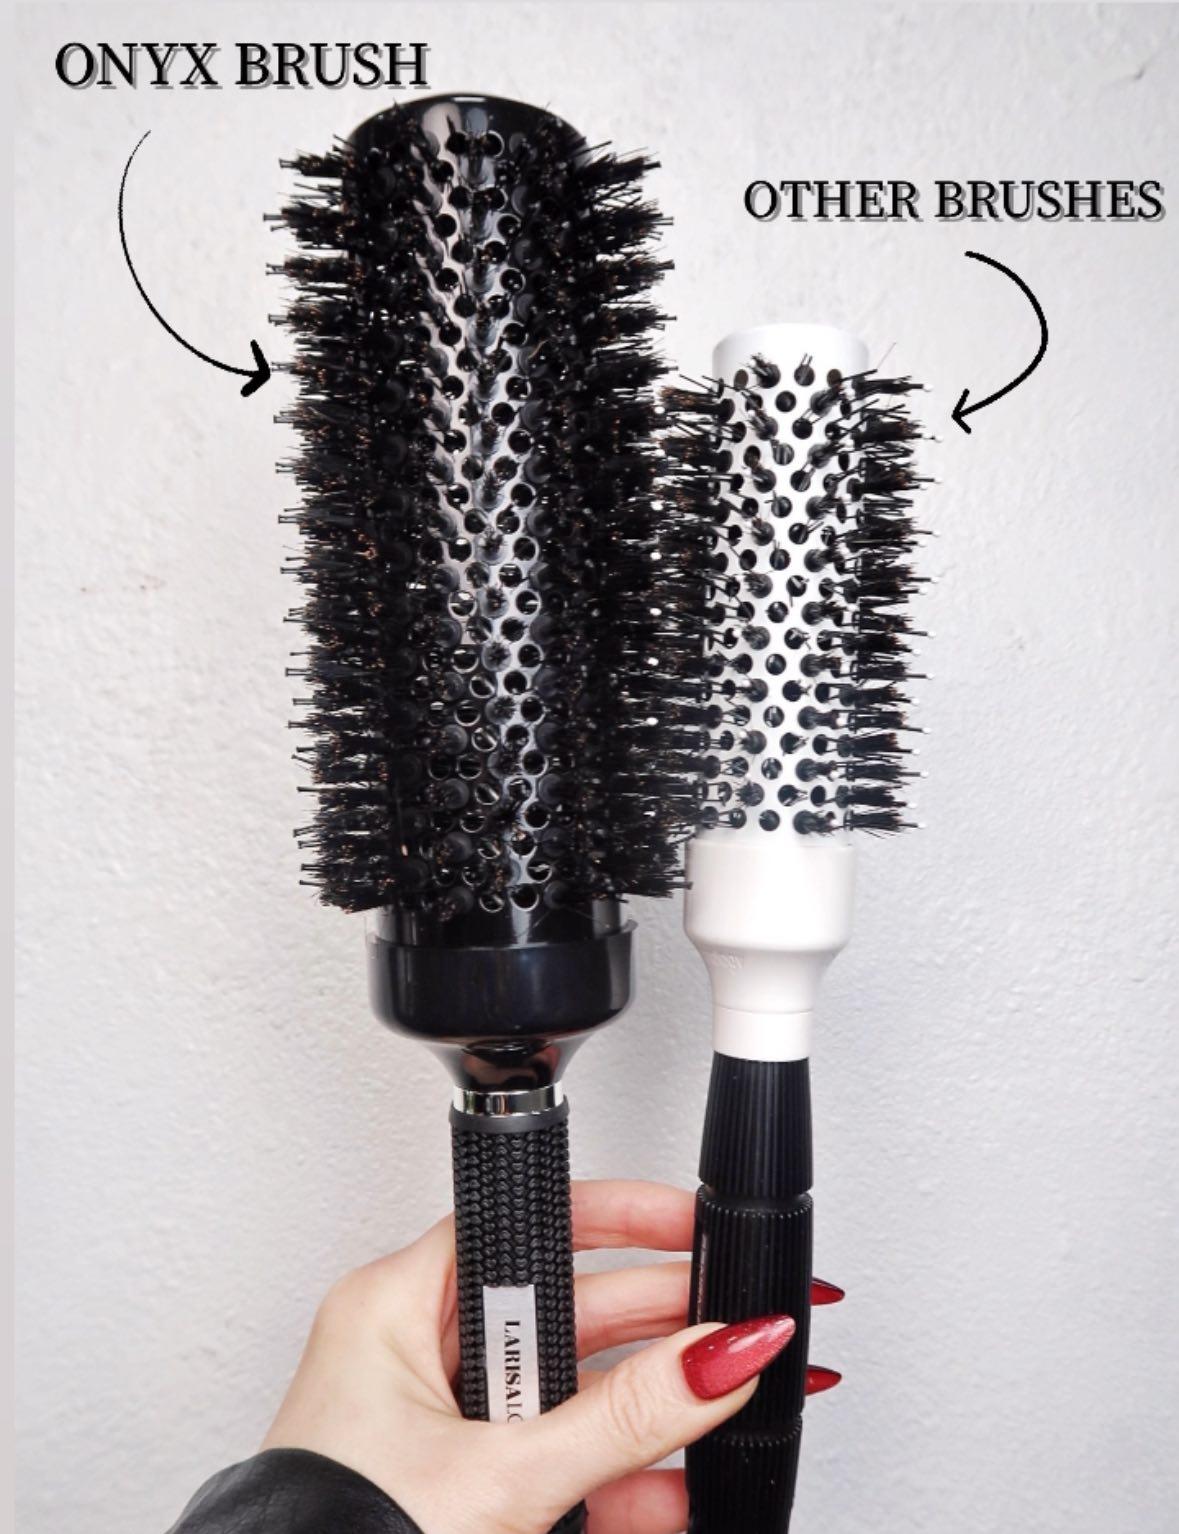 Boar bristle brushes - are they worth it? - Hair Romance